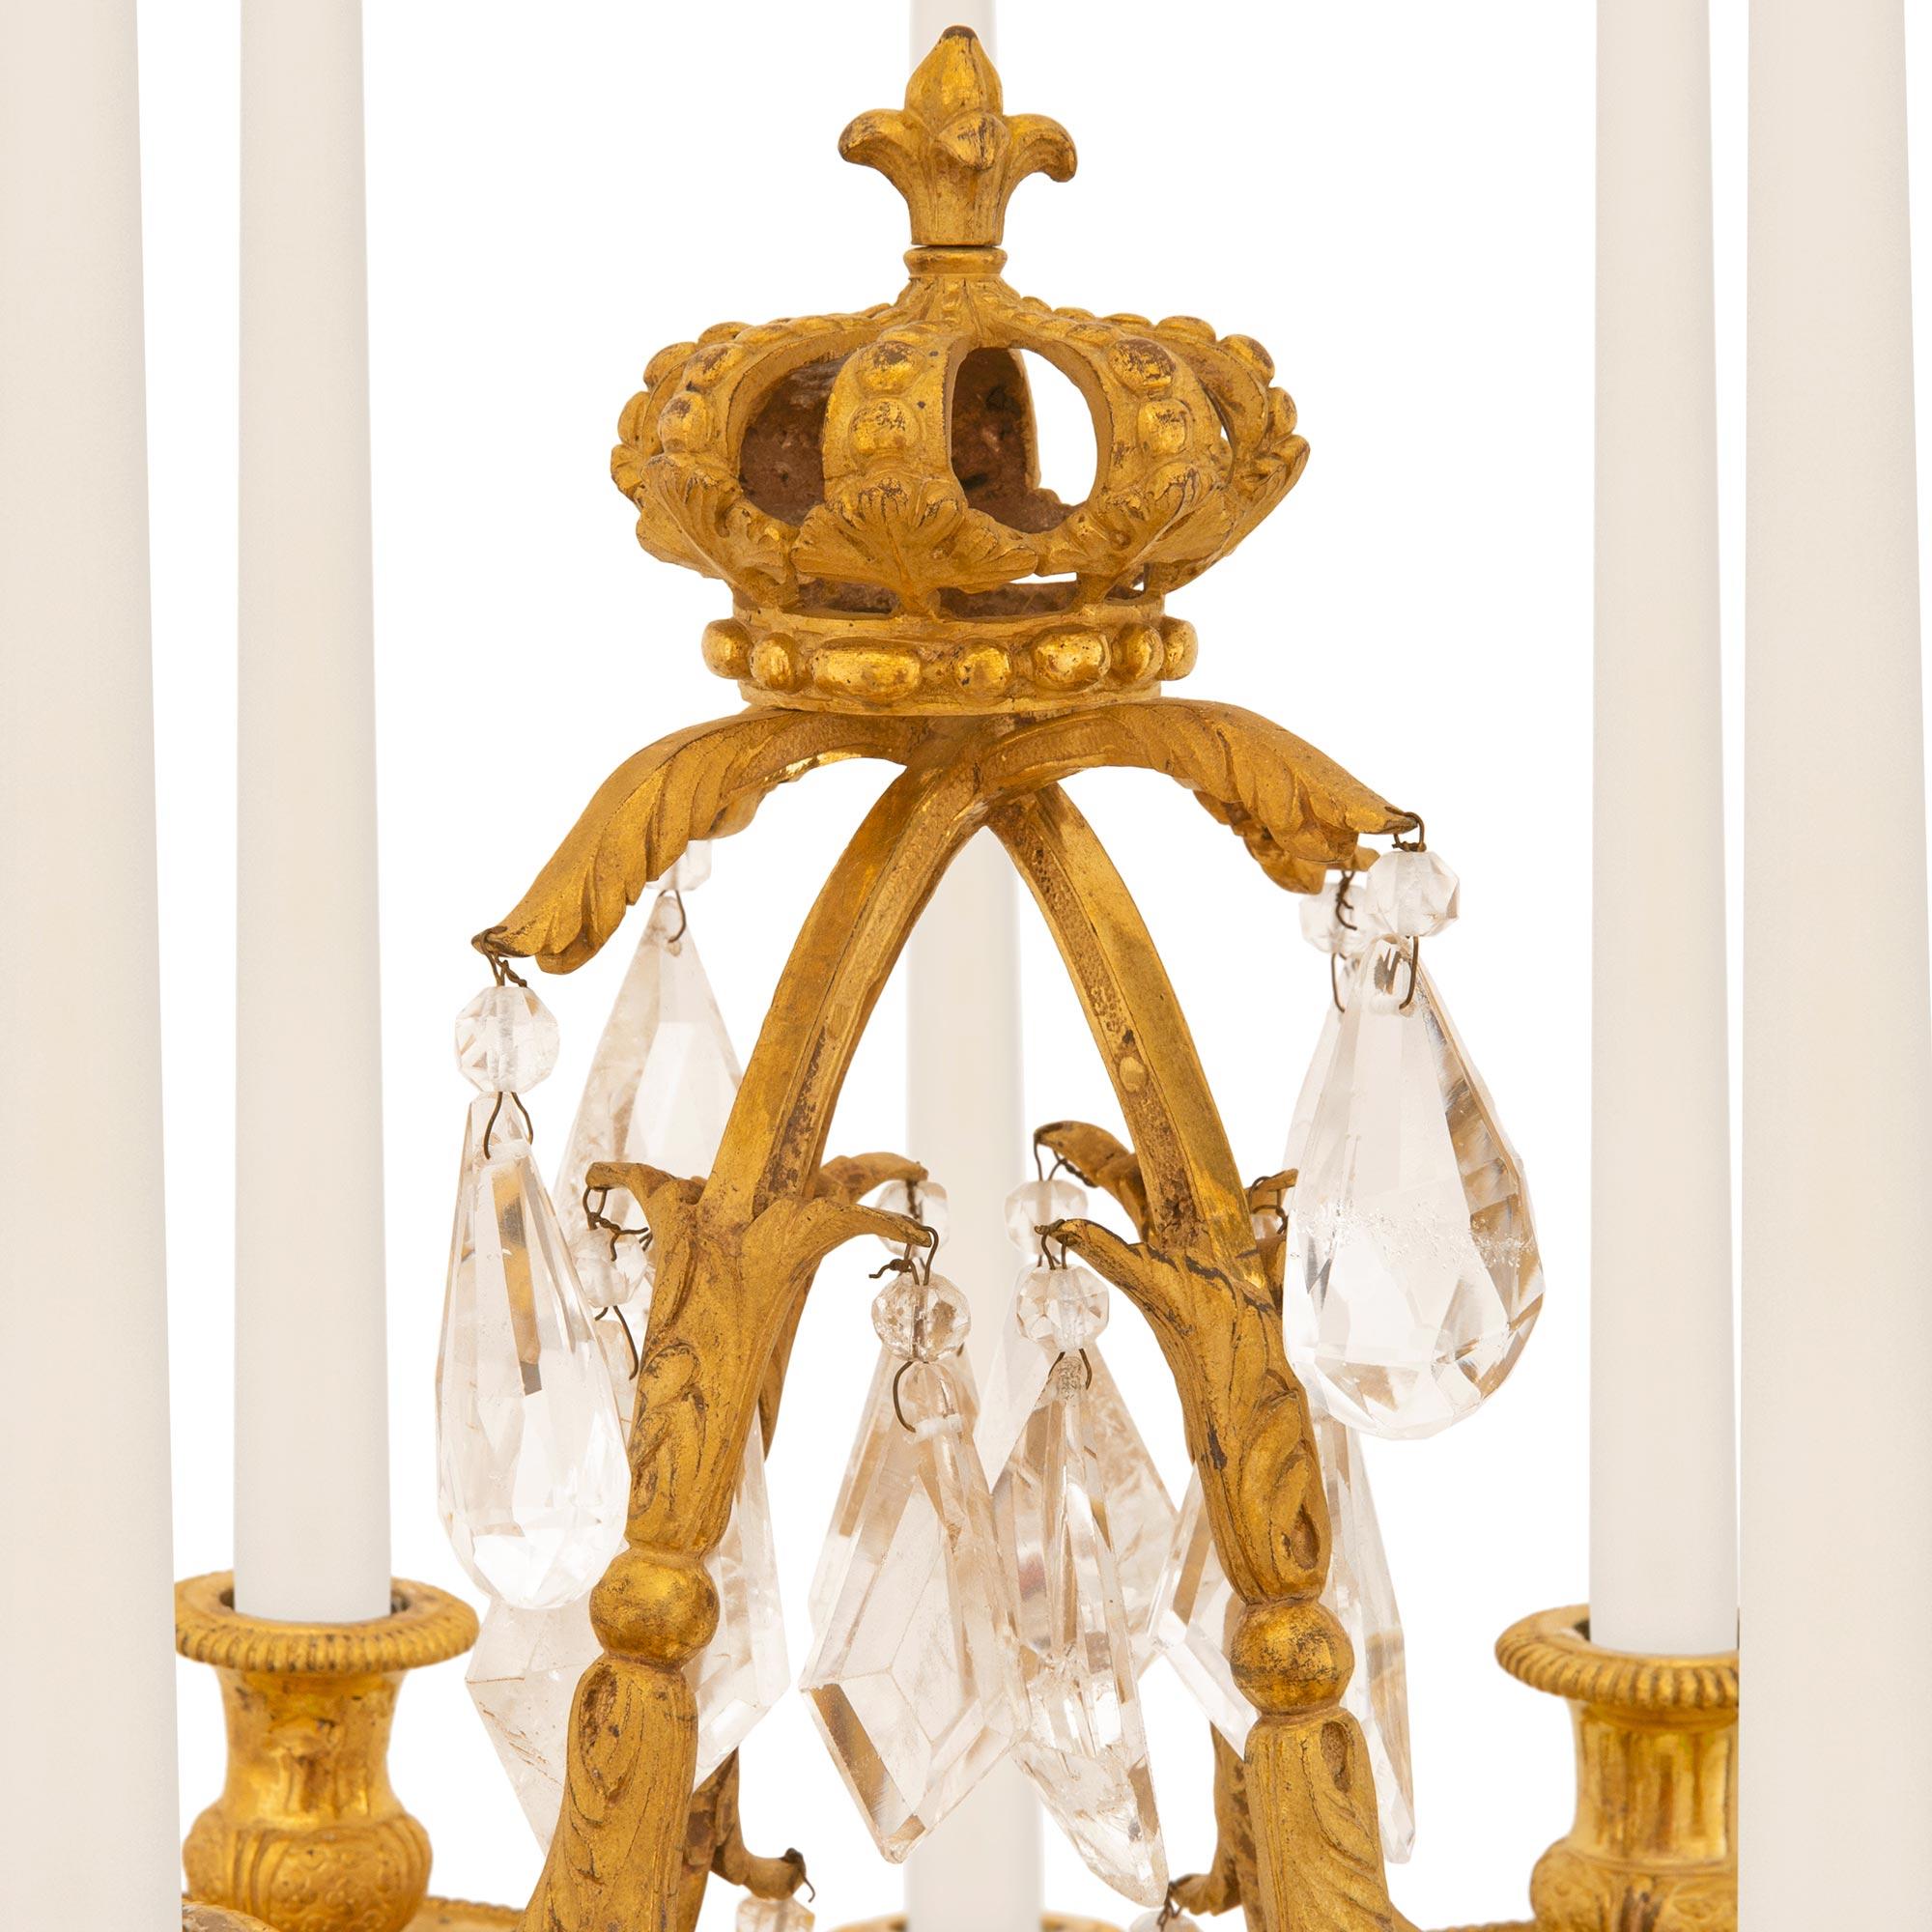 A sensational and extremely high quality pair of French 17th century Louis XIV period ormolu and rock crystal candelabras, circa 1680. Each eight arm girandole is raised by a circular mottled base with fine seashell, floral patterns, and richly